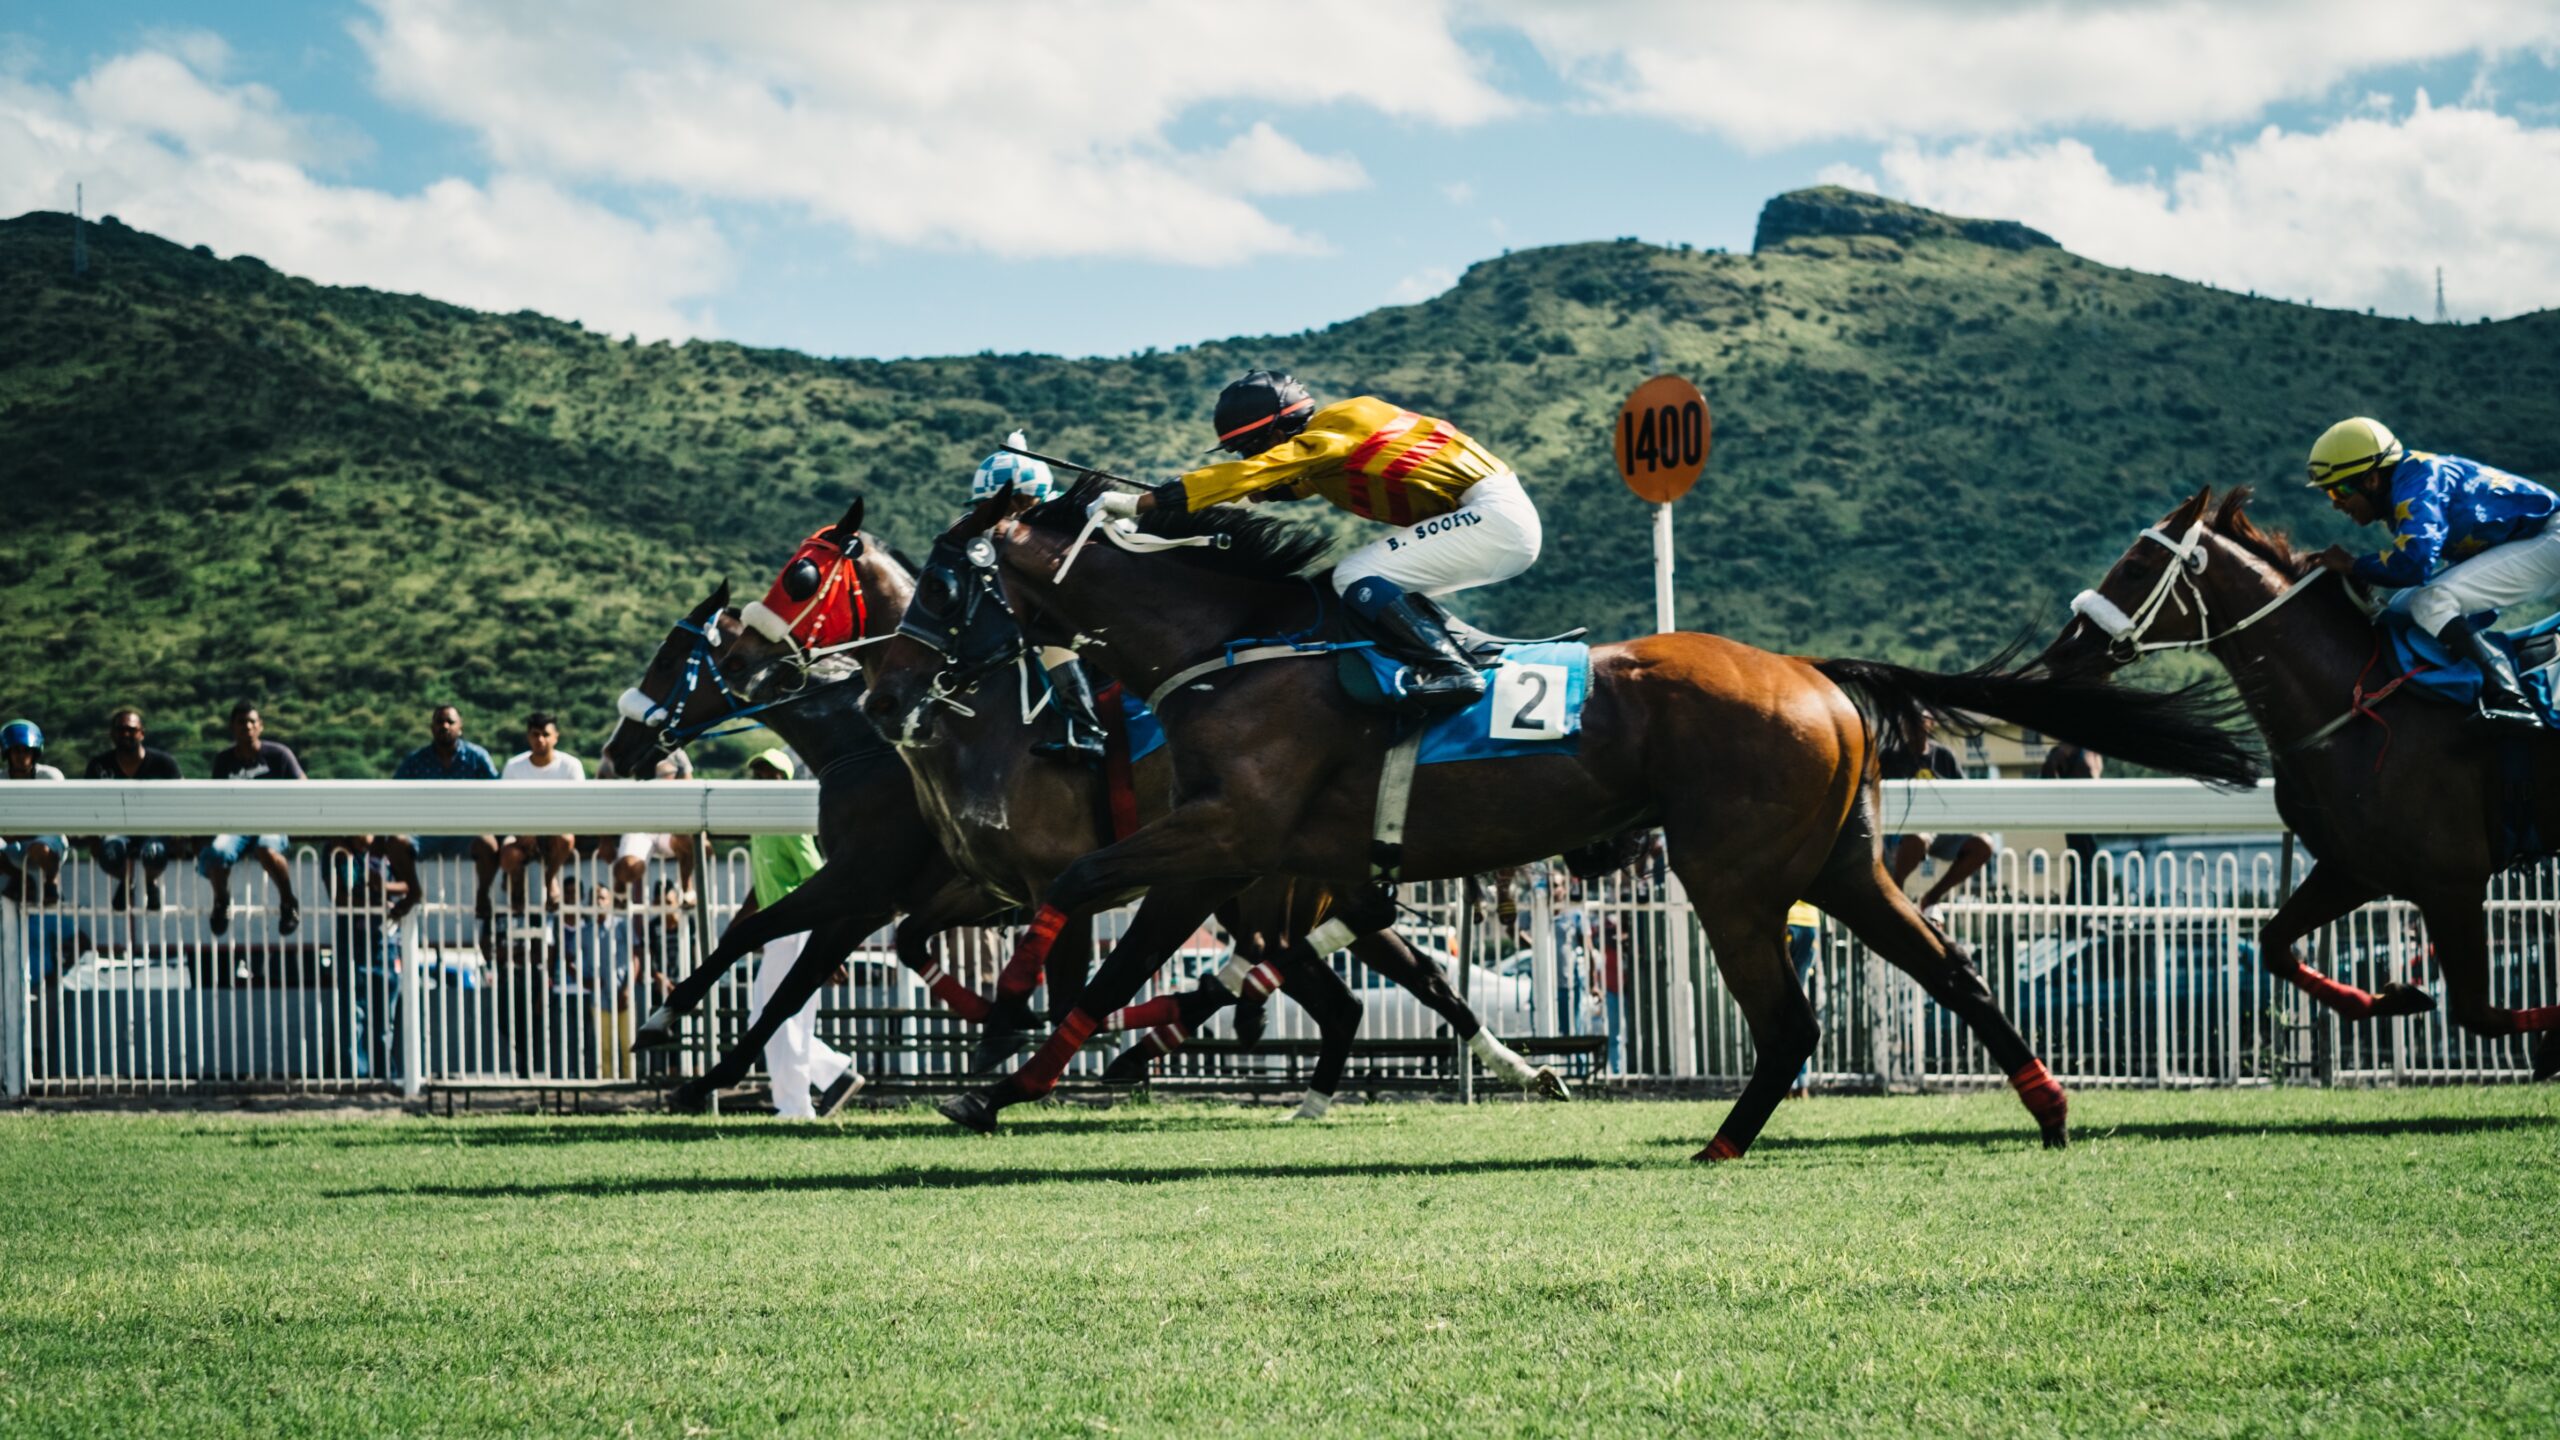 5 most lucrative horse races in the world